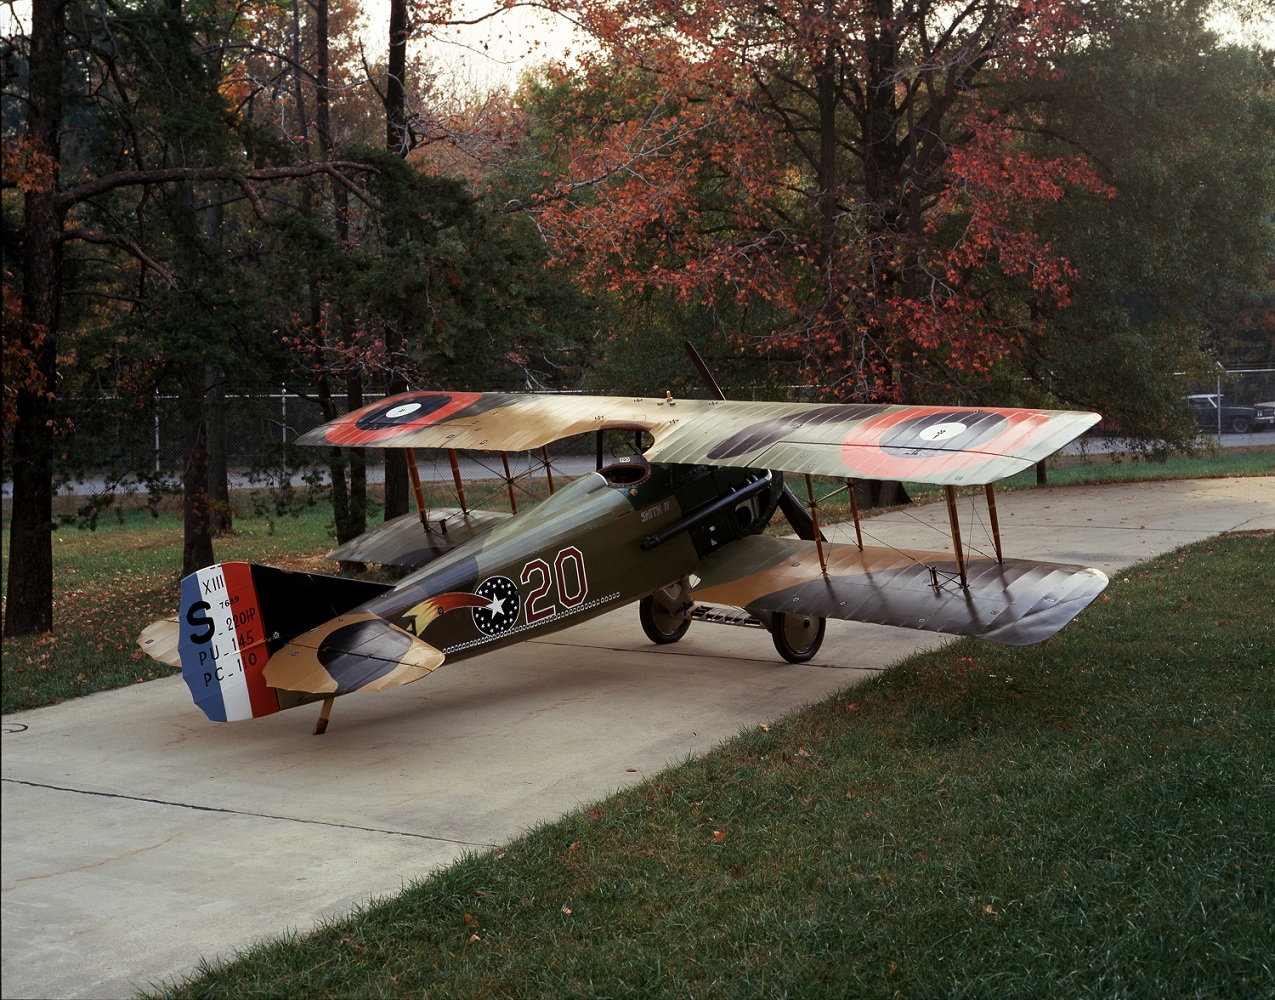 The 1918 Air Service roundels and vertical stripes on the rudder are visible on this SPAD XIII C.1, serial number 7689, Smith IV, which had just undergone restoration at the Paul E. Garber Center, Smithsonian Institution National Air and Space Museum. (Photo by Mark Avino, National Air and Space Museum, Smithsonian Institution)